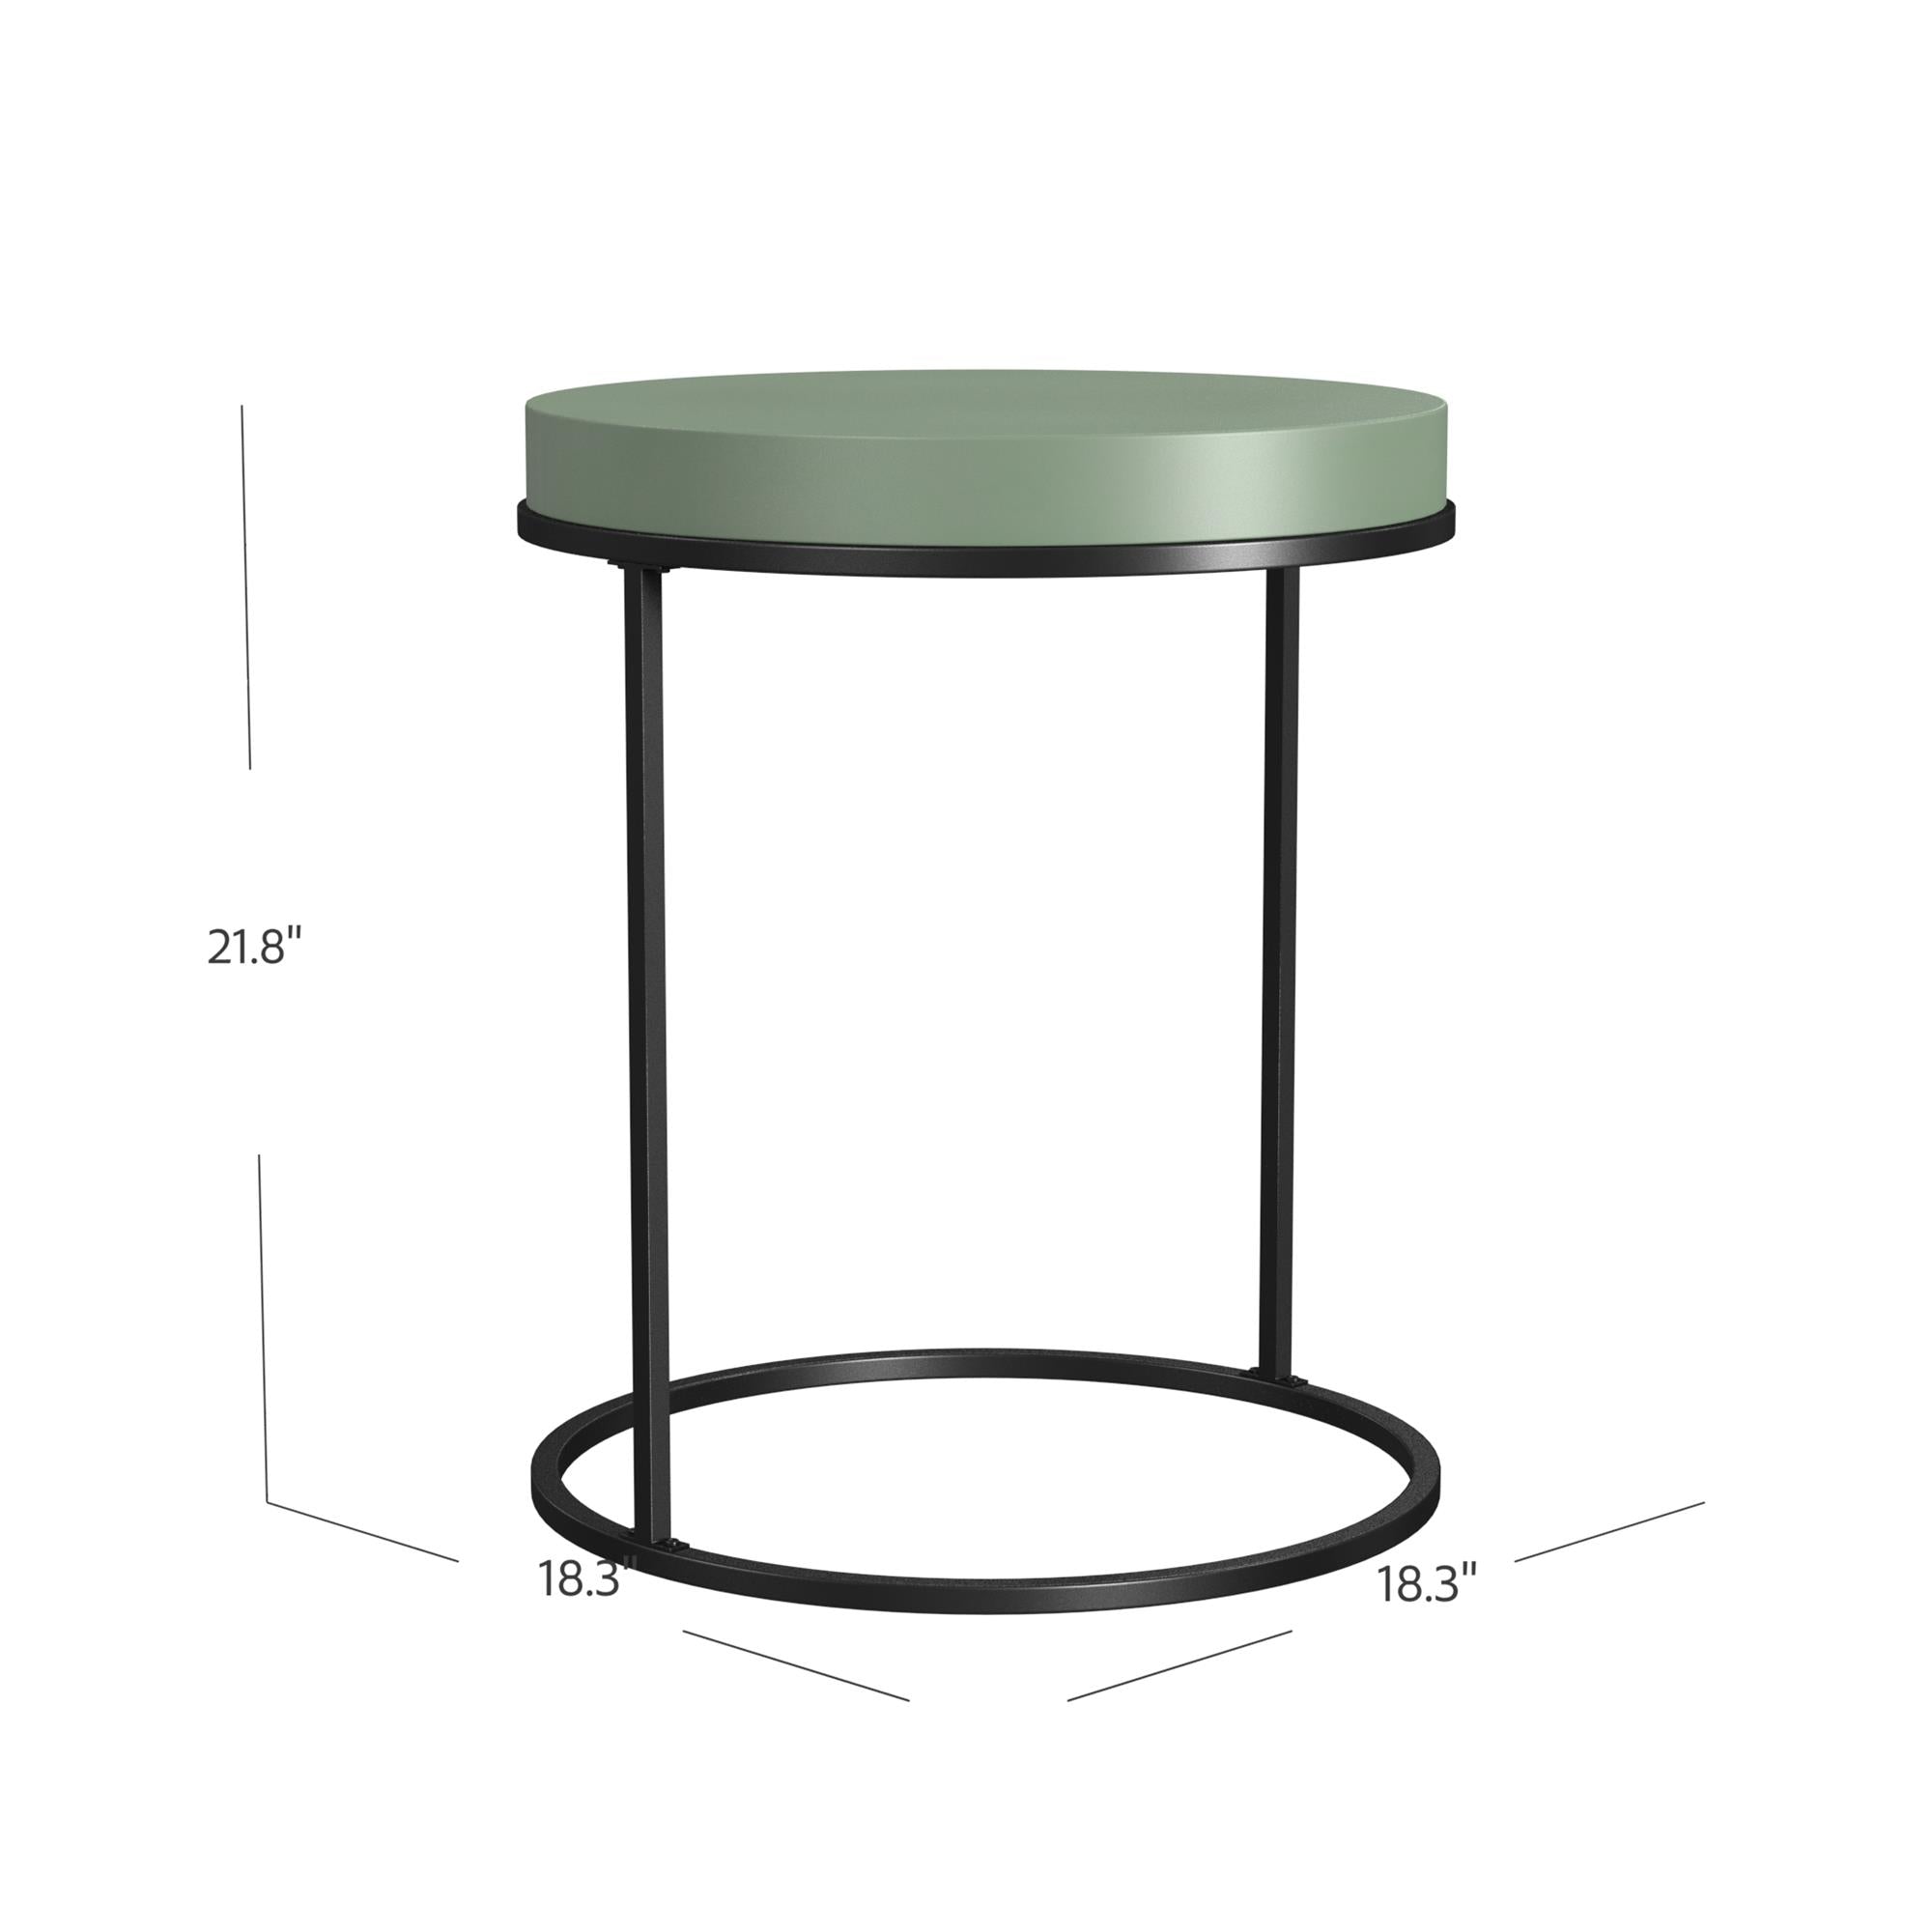 The Village Perry Round Accent Table, Sage Green - Sage